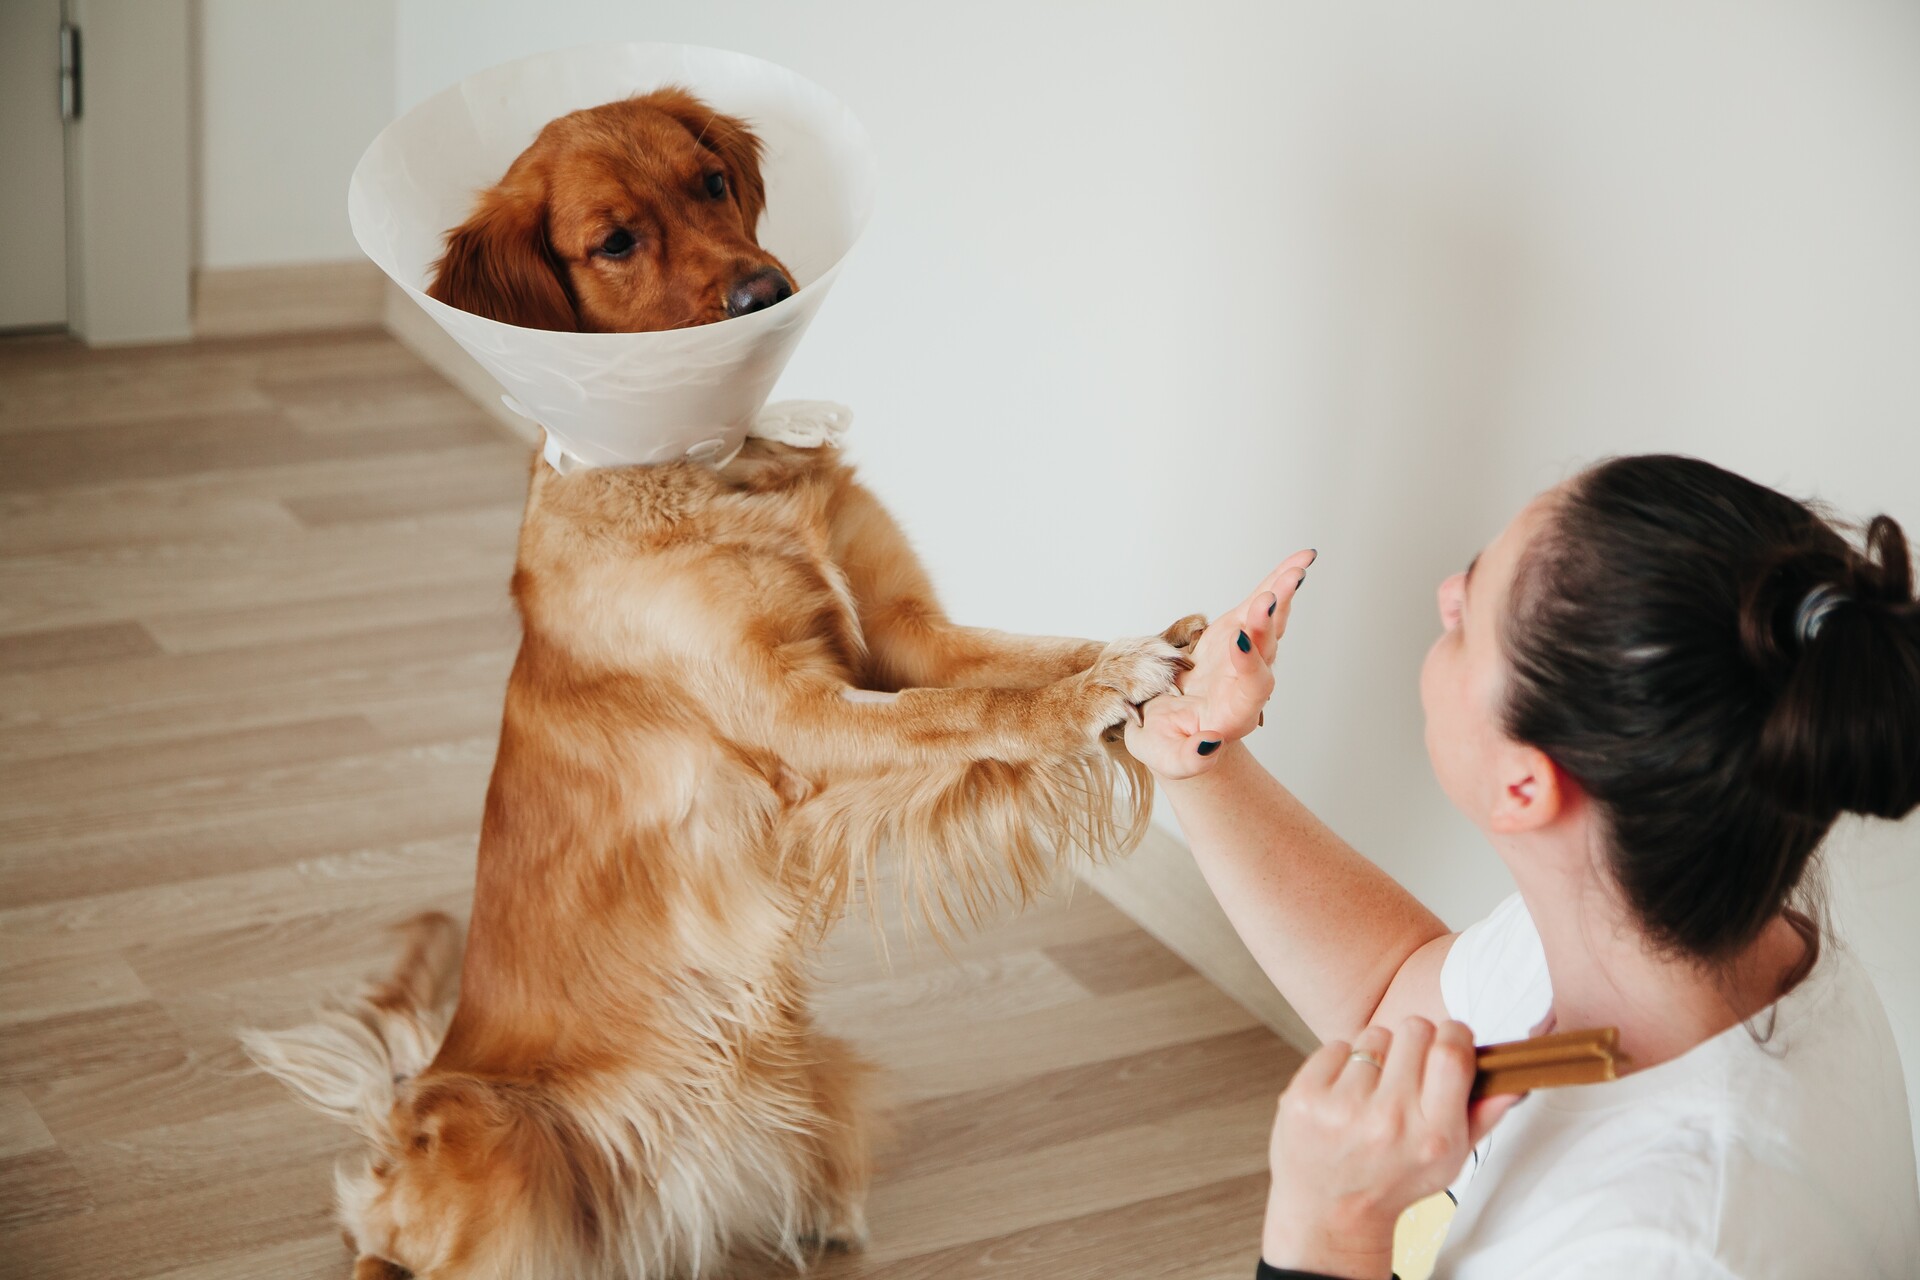 A dog wearing a neck collar playing with a woman